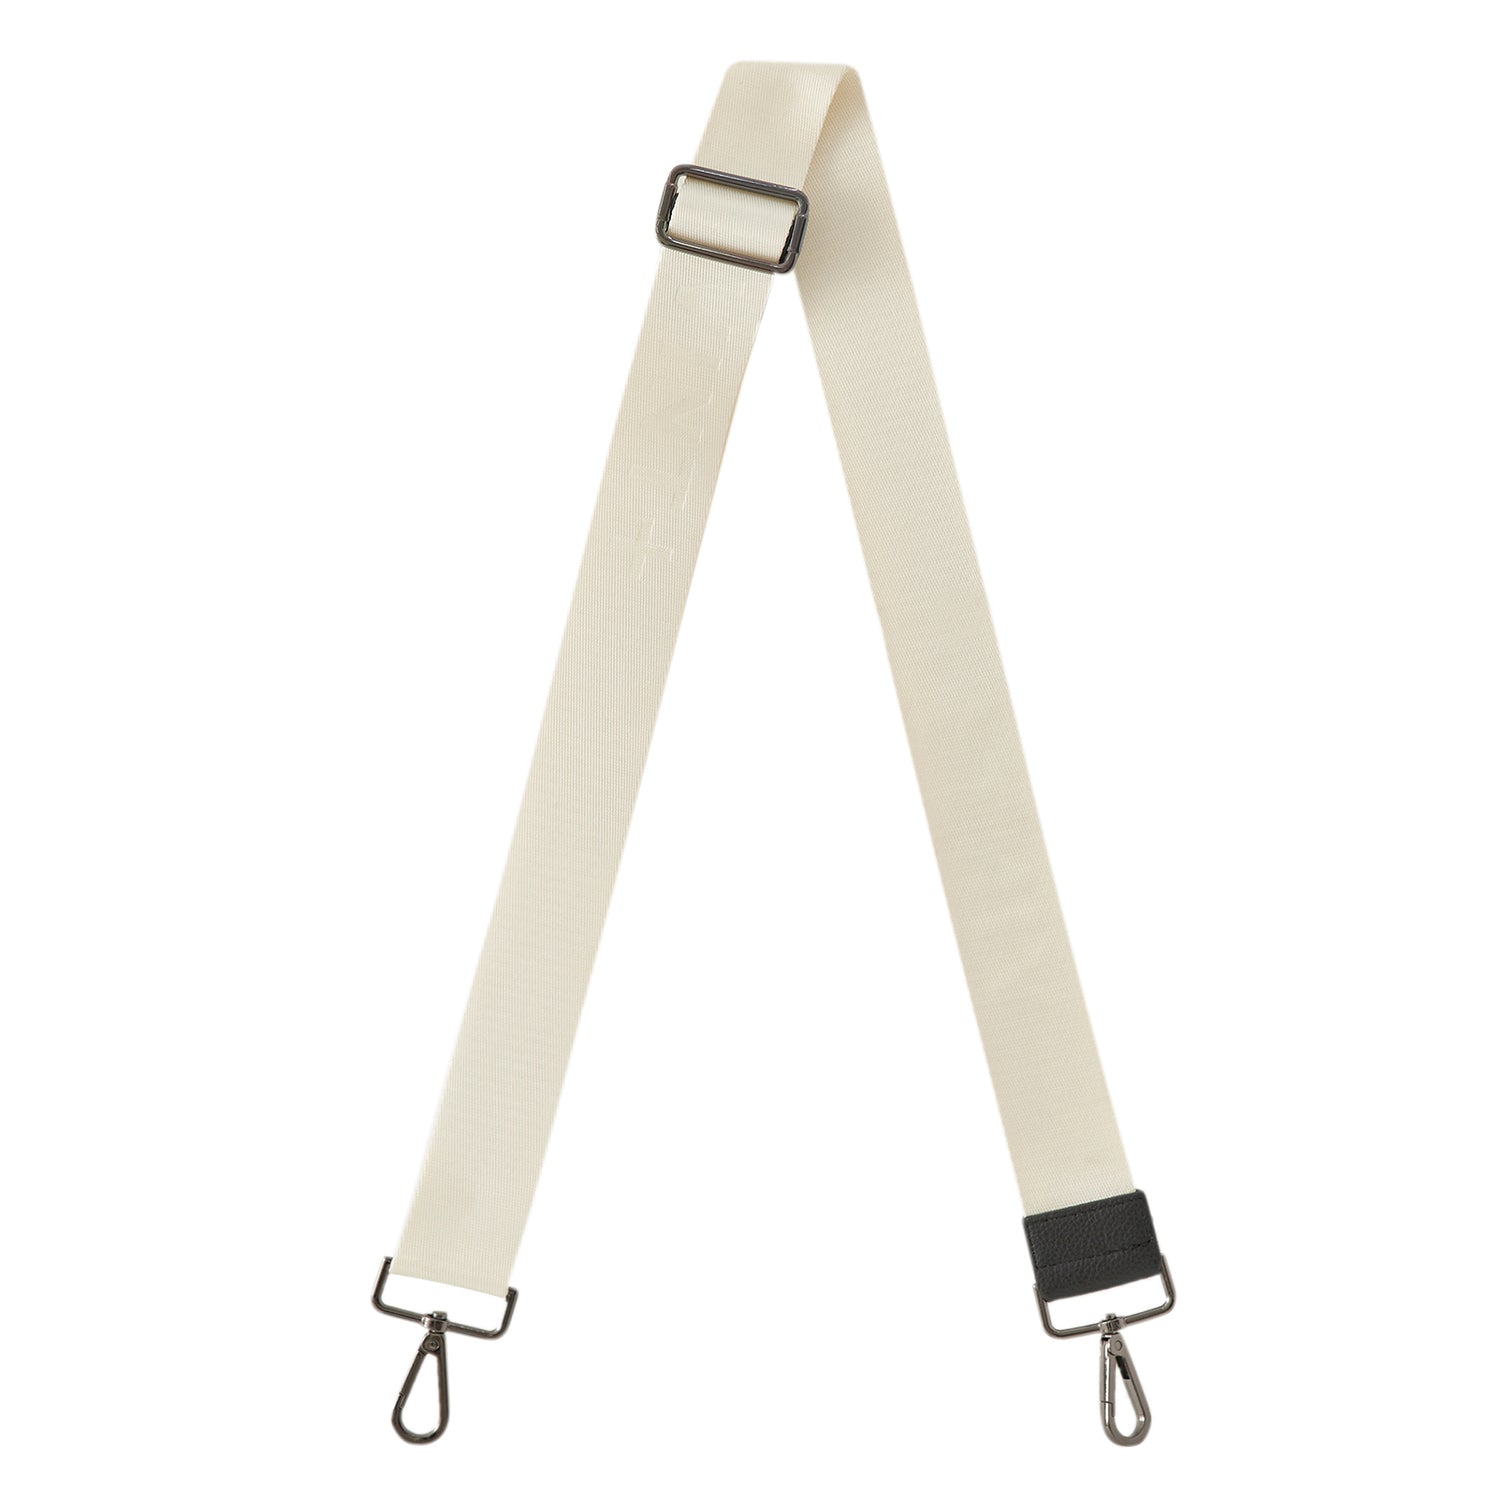 CARRYING STRAP - CREAM WHITE